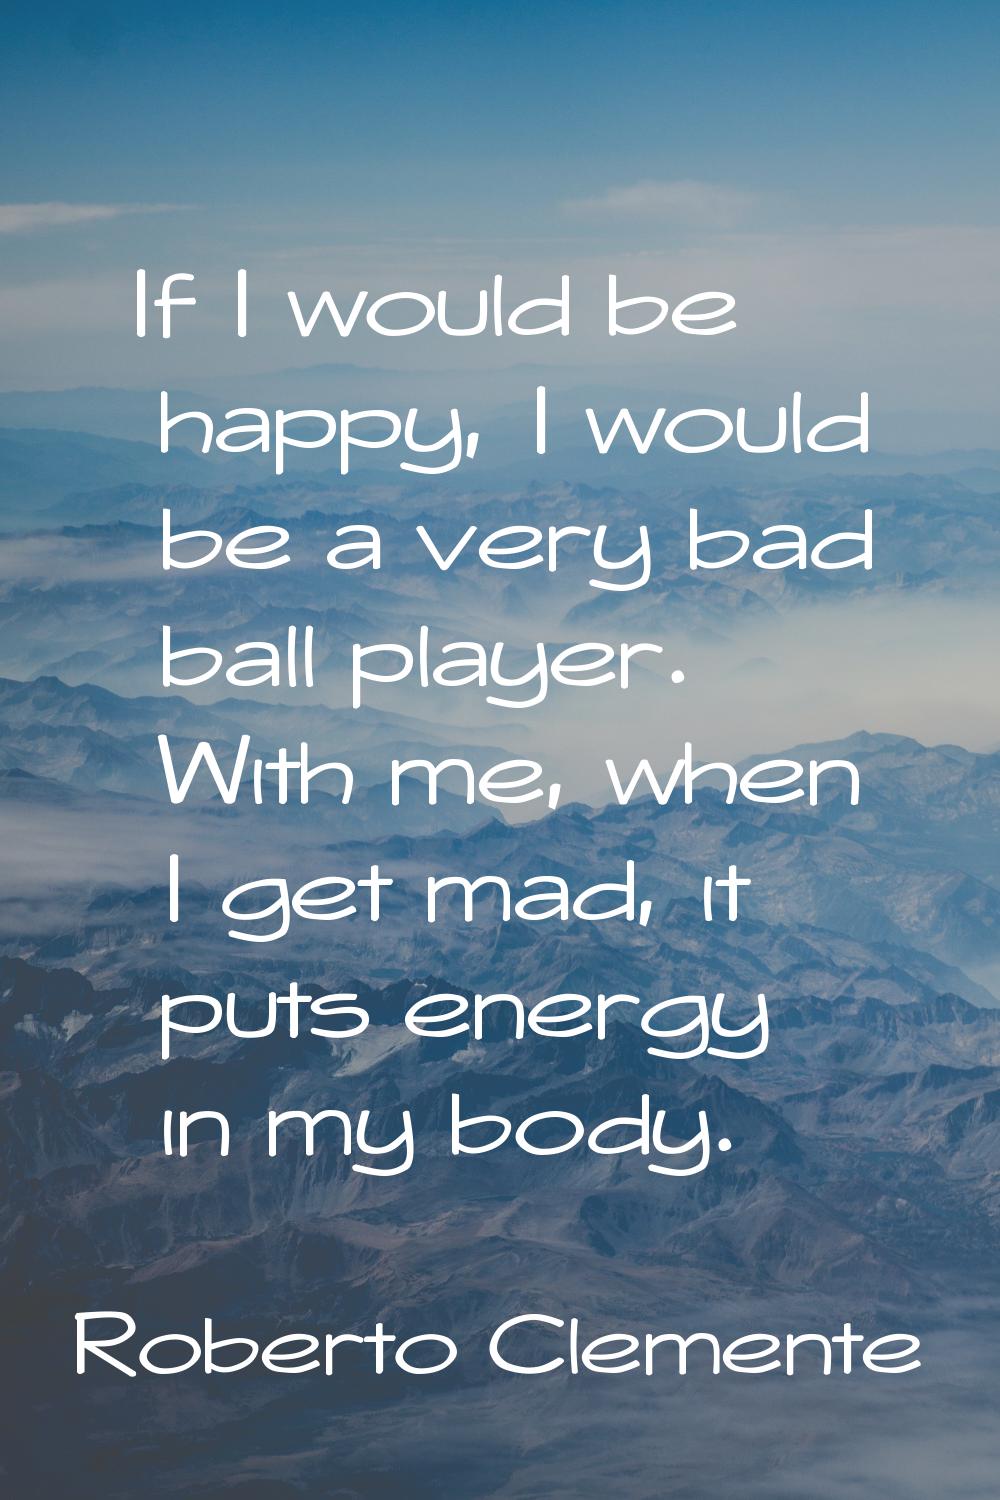 If I would be happy, I would be a very bad ball player. With me, when I get mad, it puts energy in 